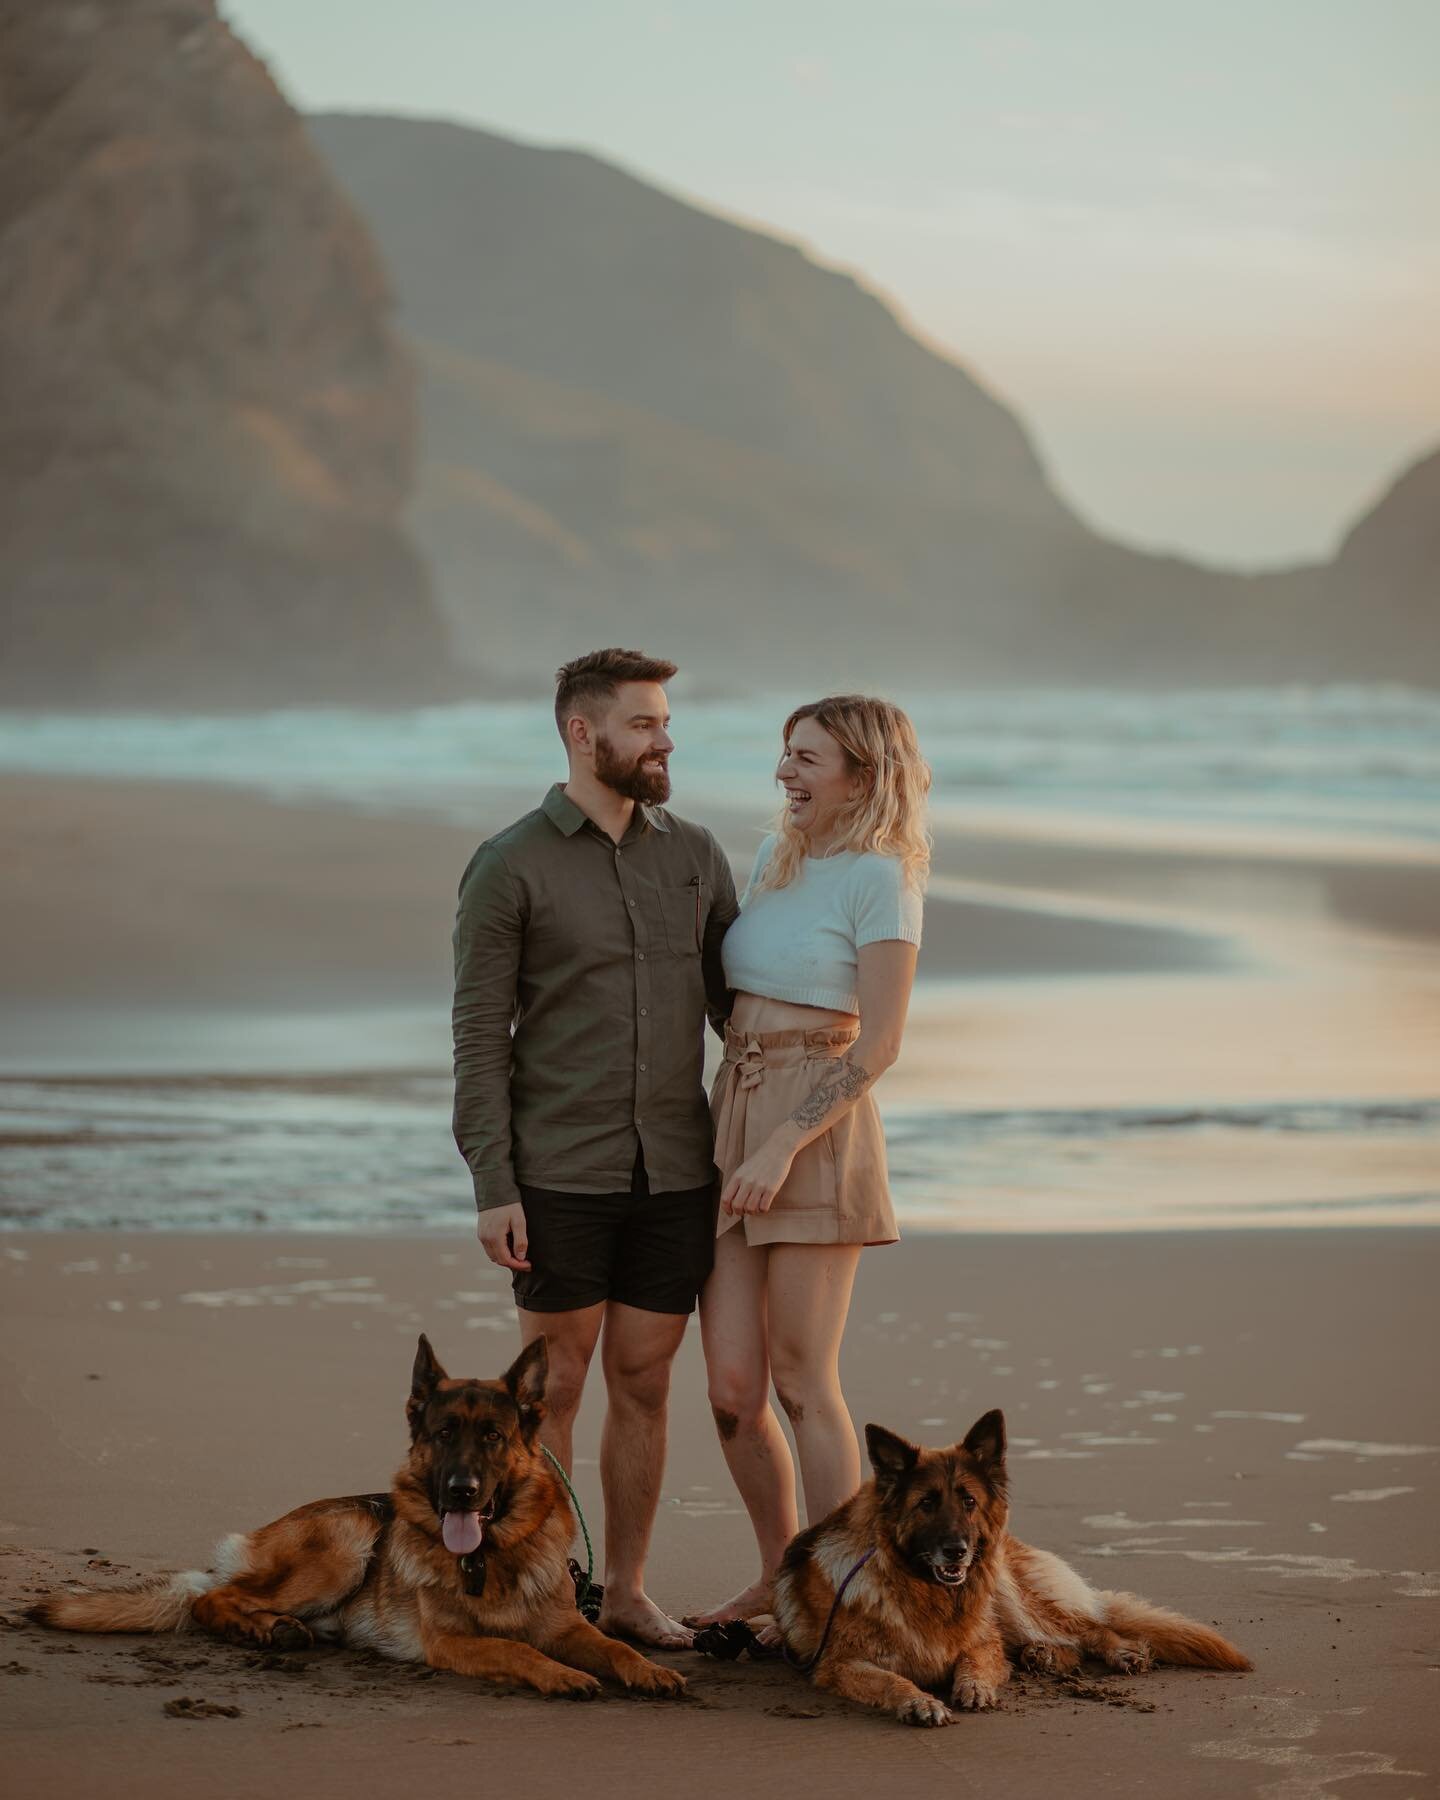 Cutler really went all out on his smile in the second slide! He&rsquo;s legit the dog reincarnation of this emoji : 🤪
.
.
.
.
.
#photogram 
#creativephotography 
#lovethelittlethings 
#nzwed
#queenstownweddingphotographer
#queenstownelopementphotogr